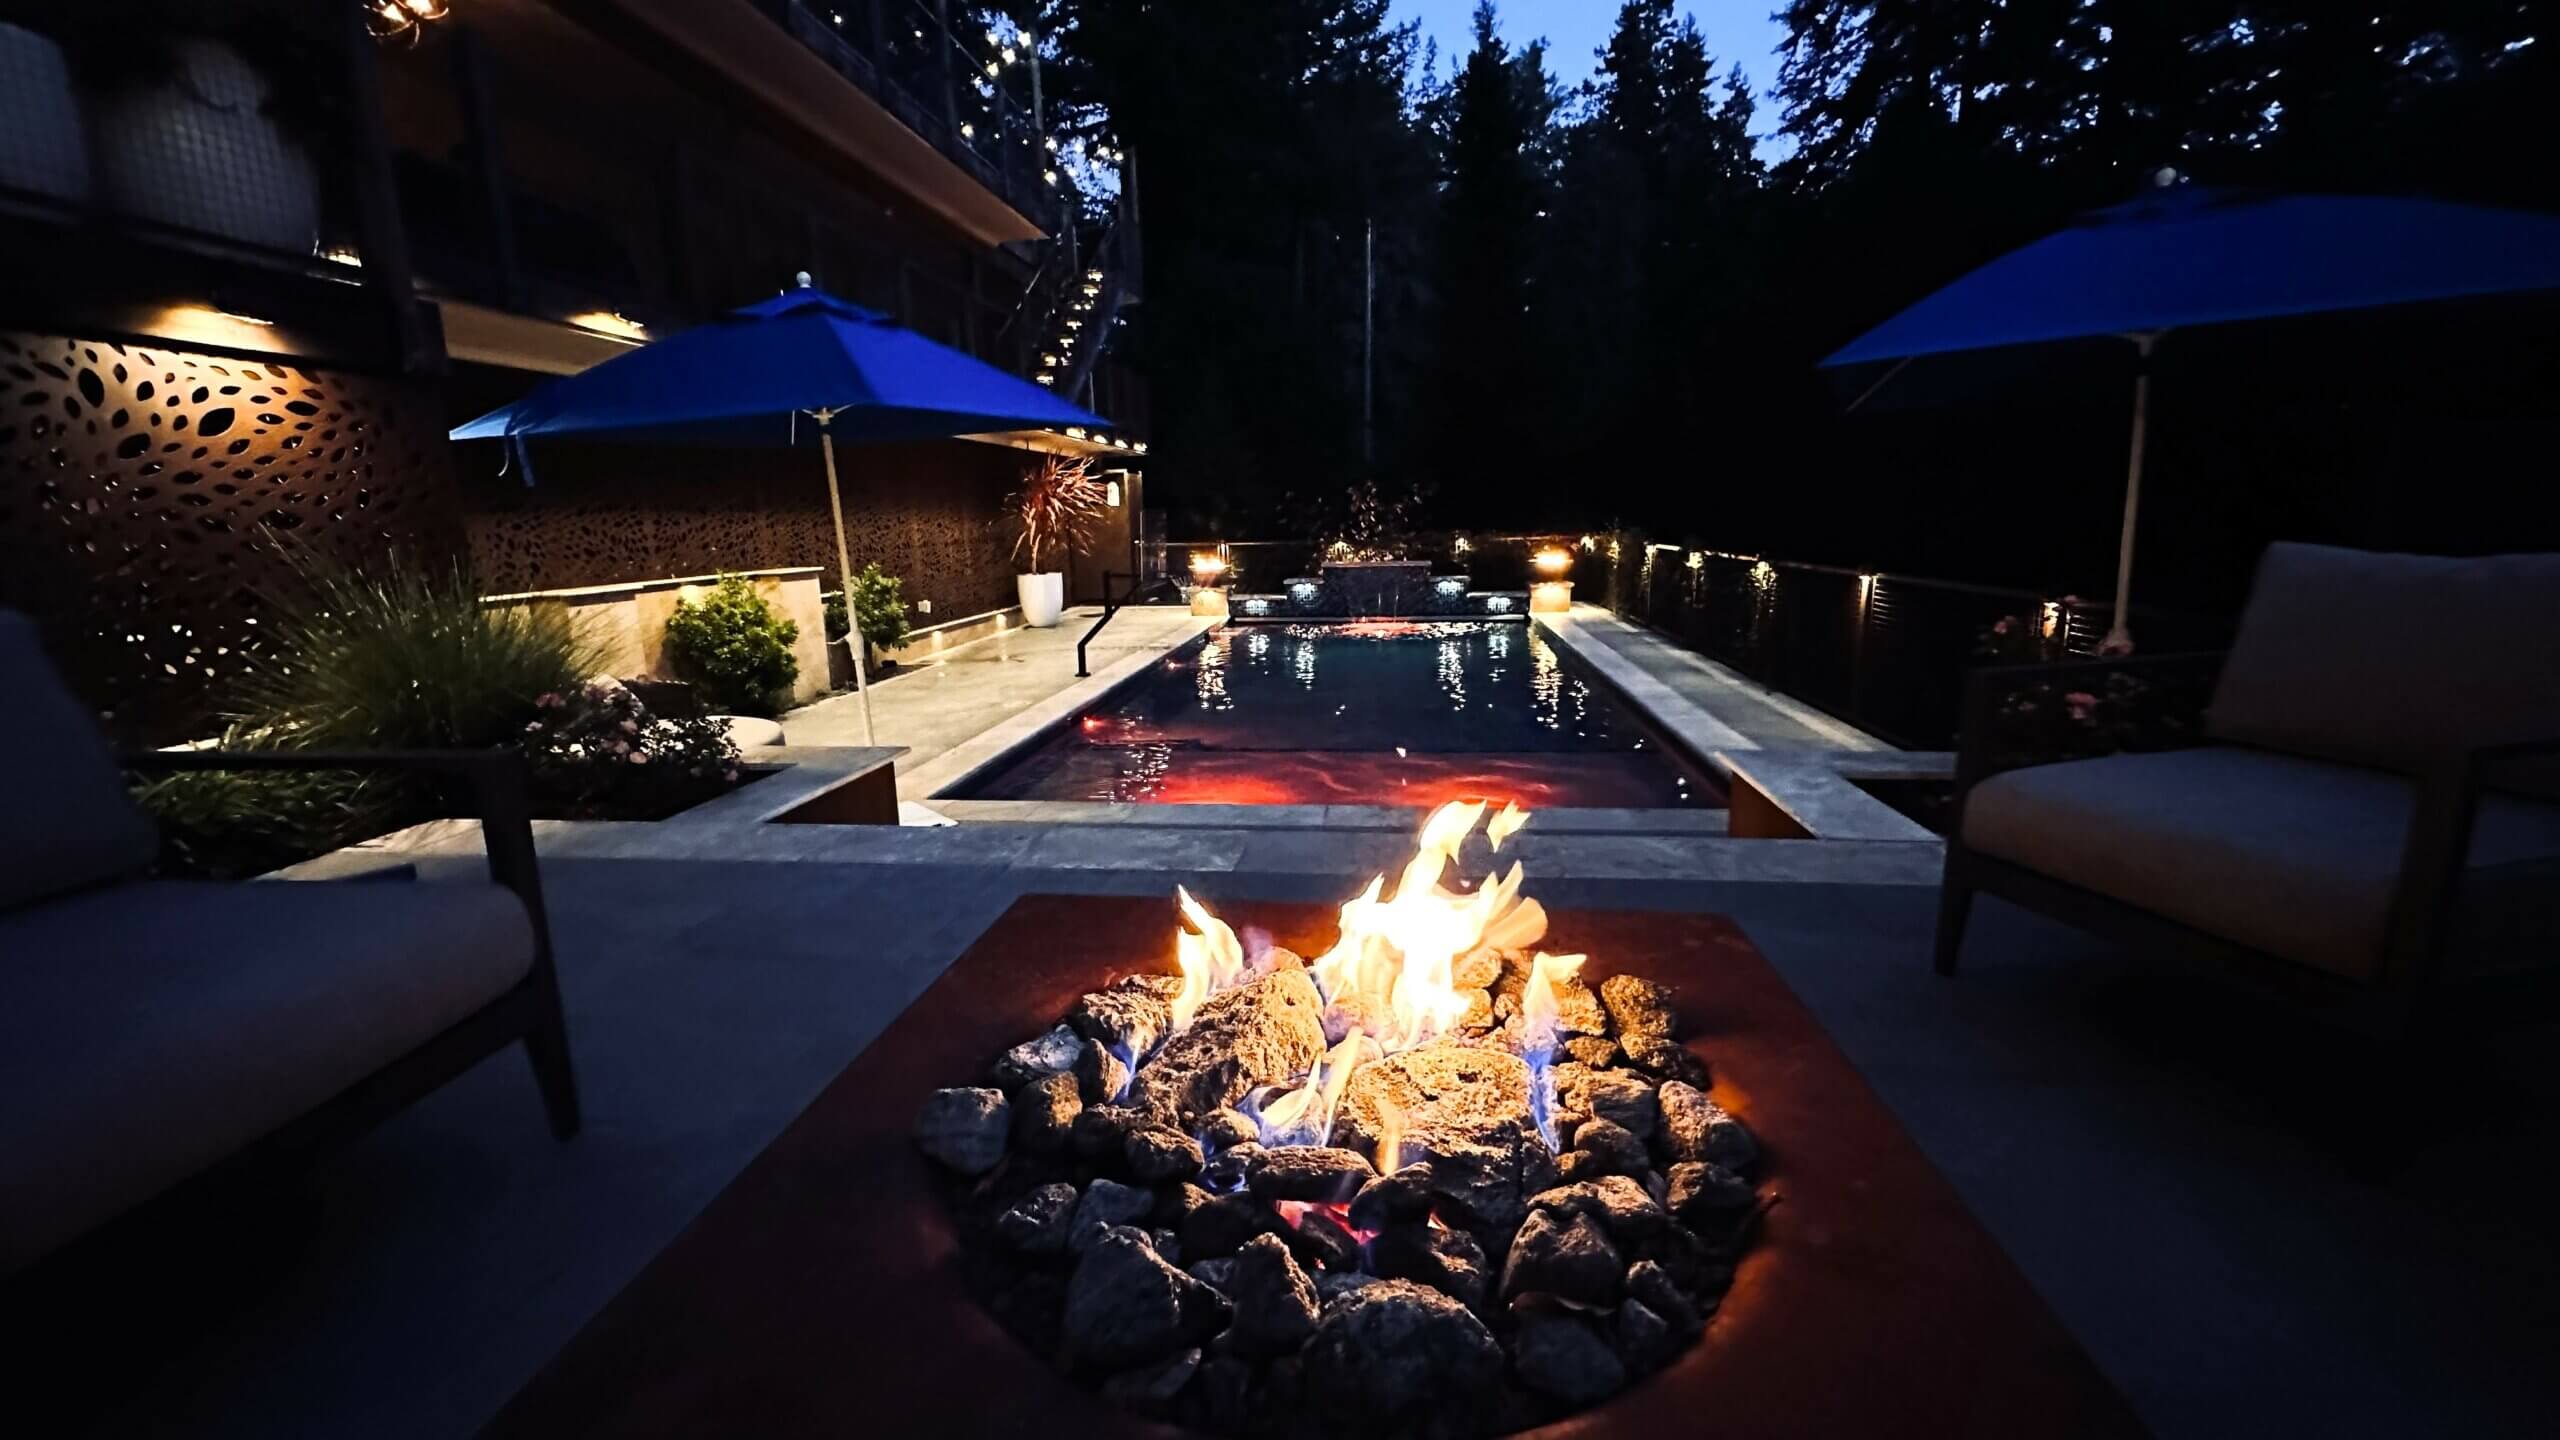 Firepit with swimming Pool at Night with Red Lights in the background